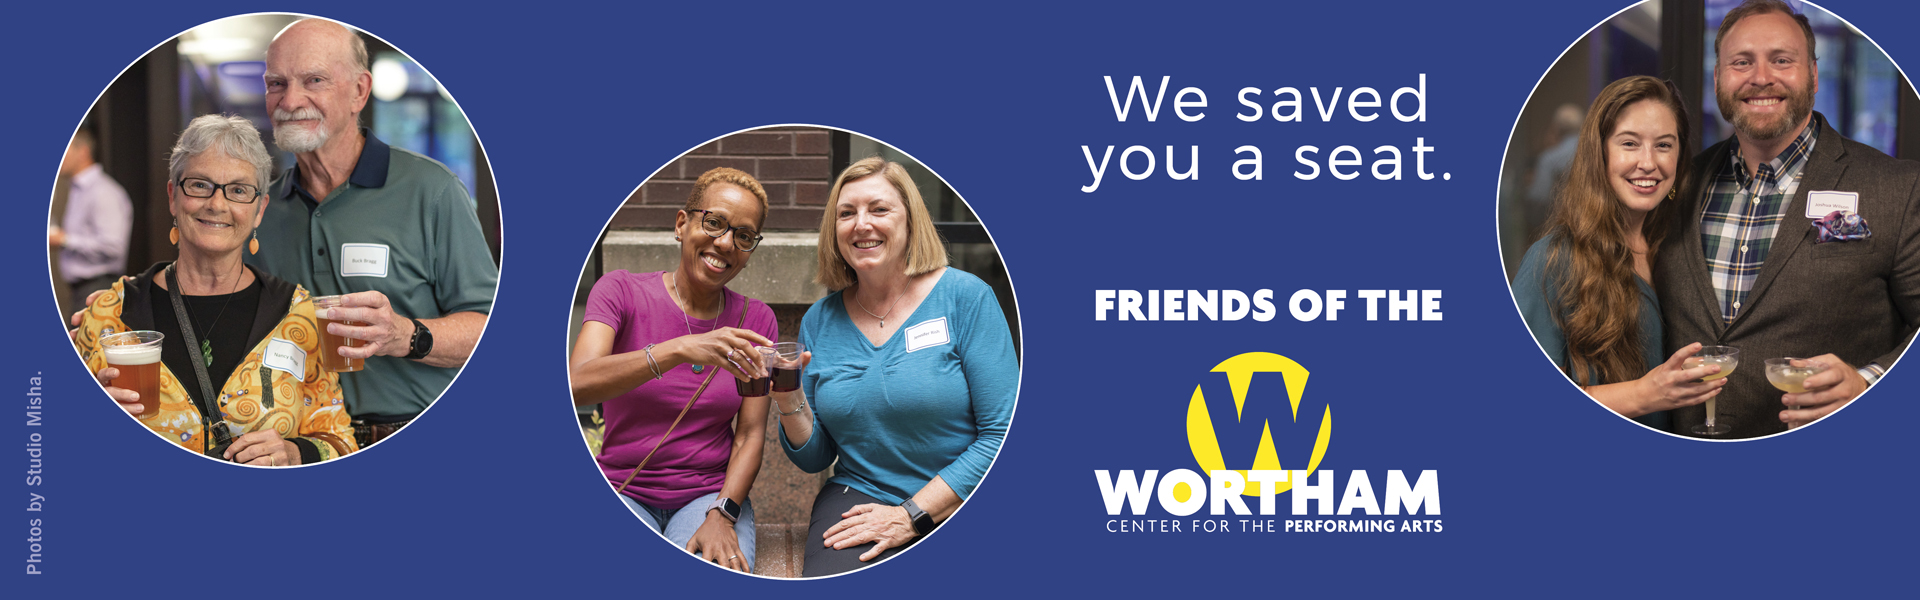 We saved you a seat. Friends of the Wortham Center for the Performing Arts.